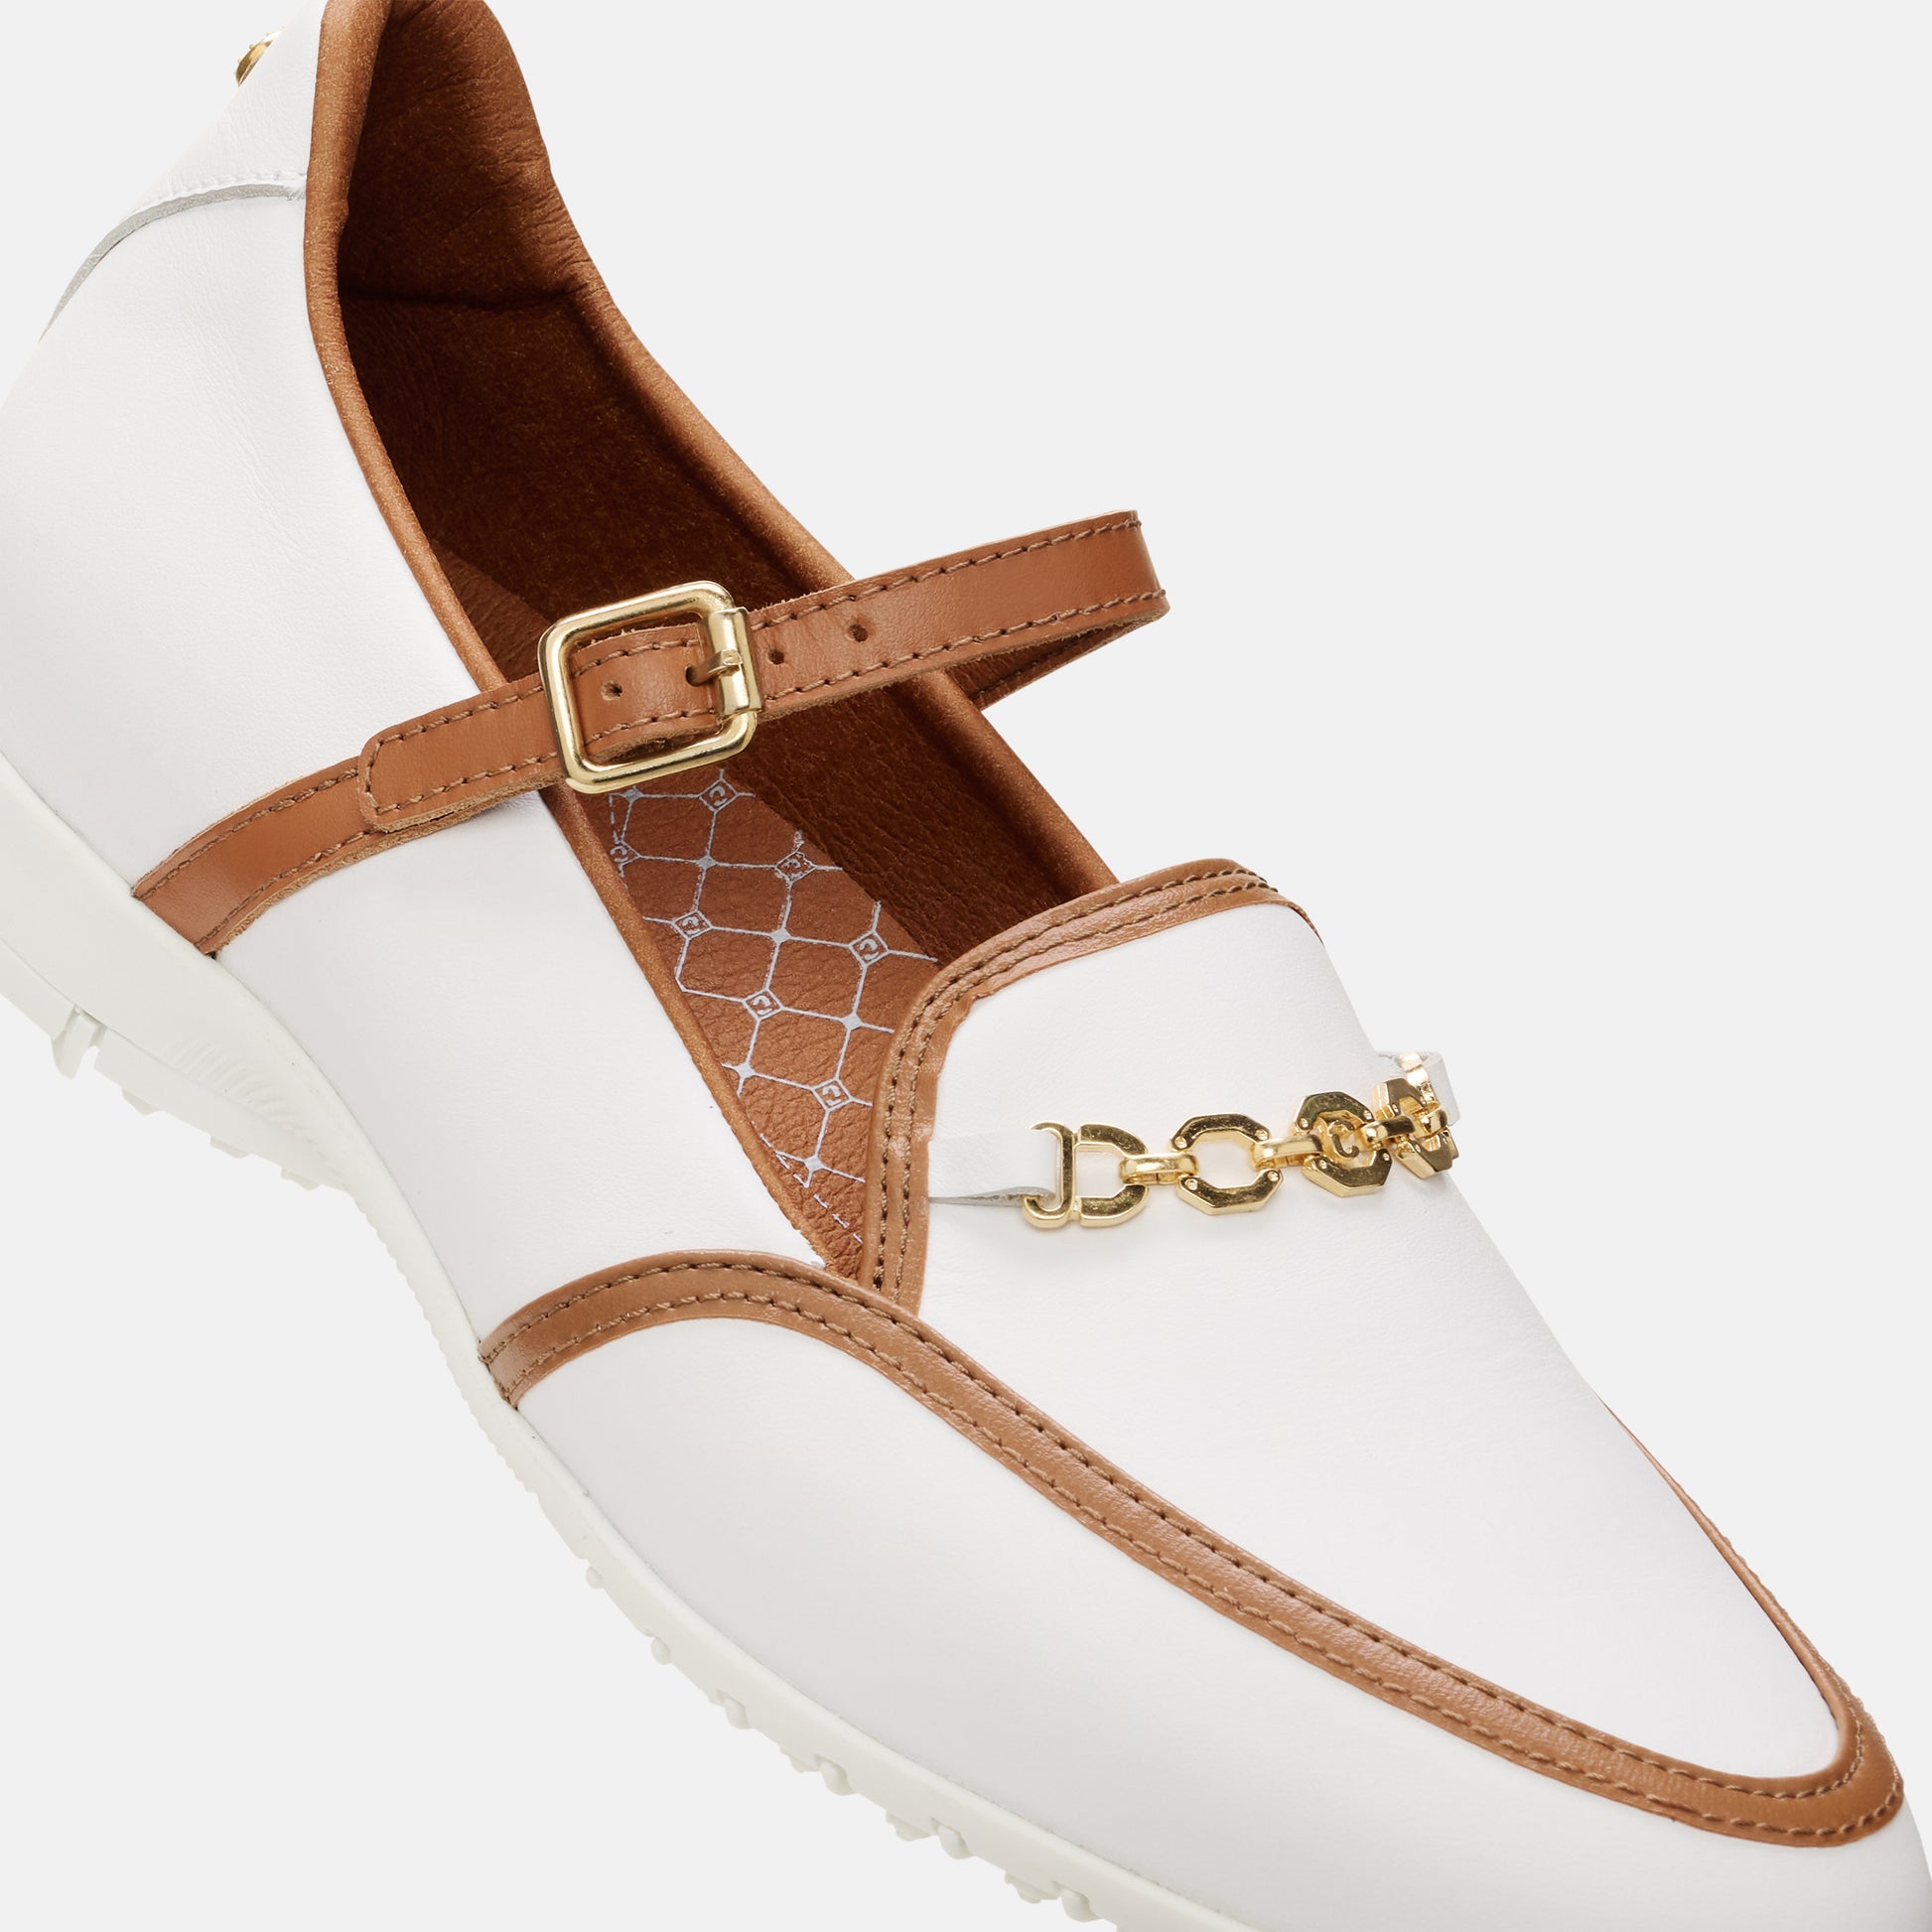 White Golf Shoes, Lightweight Golf Shoes, Spikeless Golf Shoes, Duca del Cosma Women's Golf Shoes, Classic golf shoes.